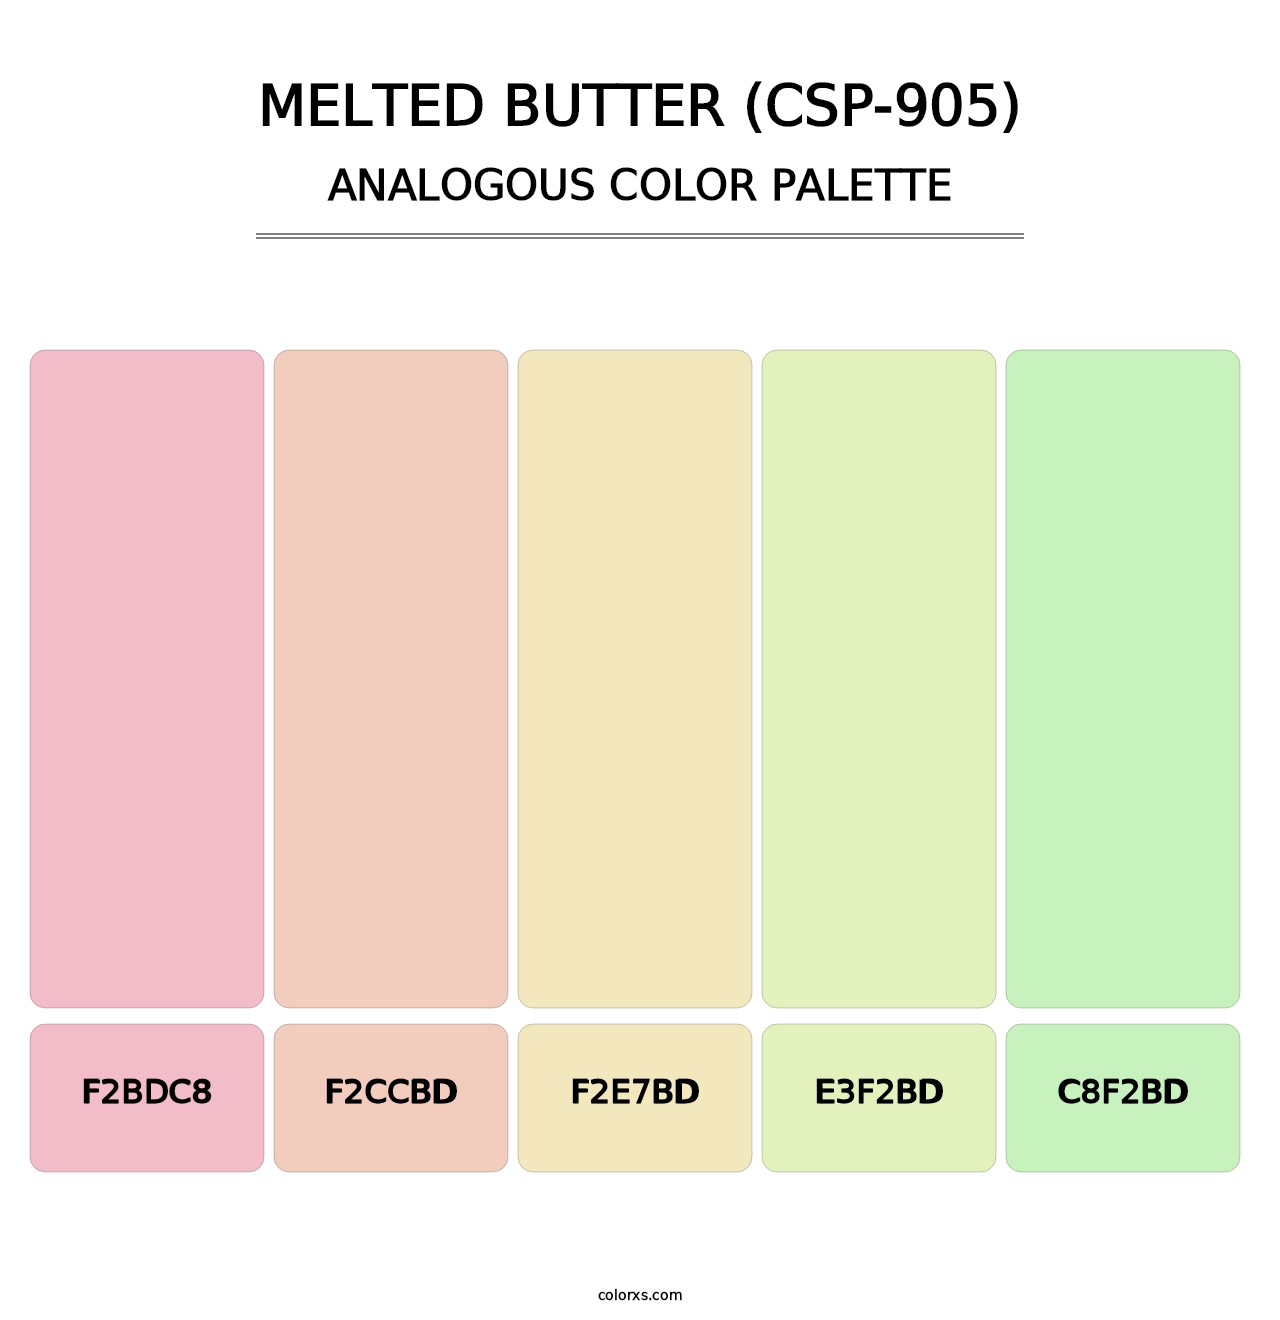 Melted Butter (CSP-905) - Analogous Color Palette